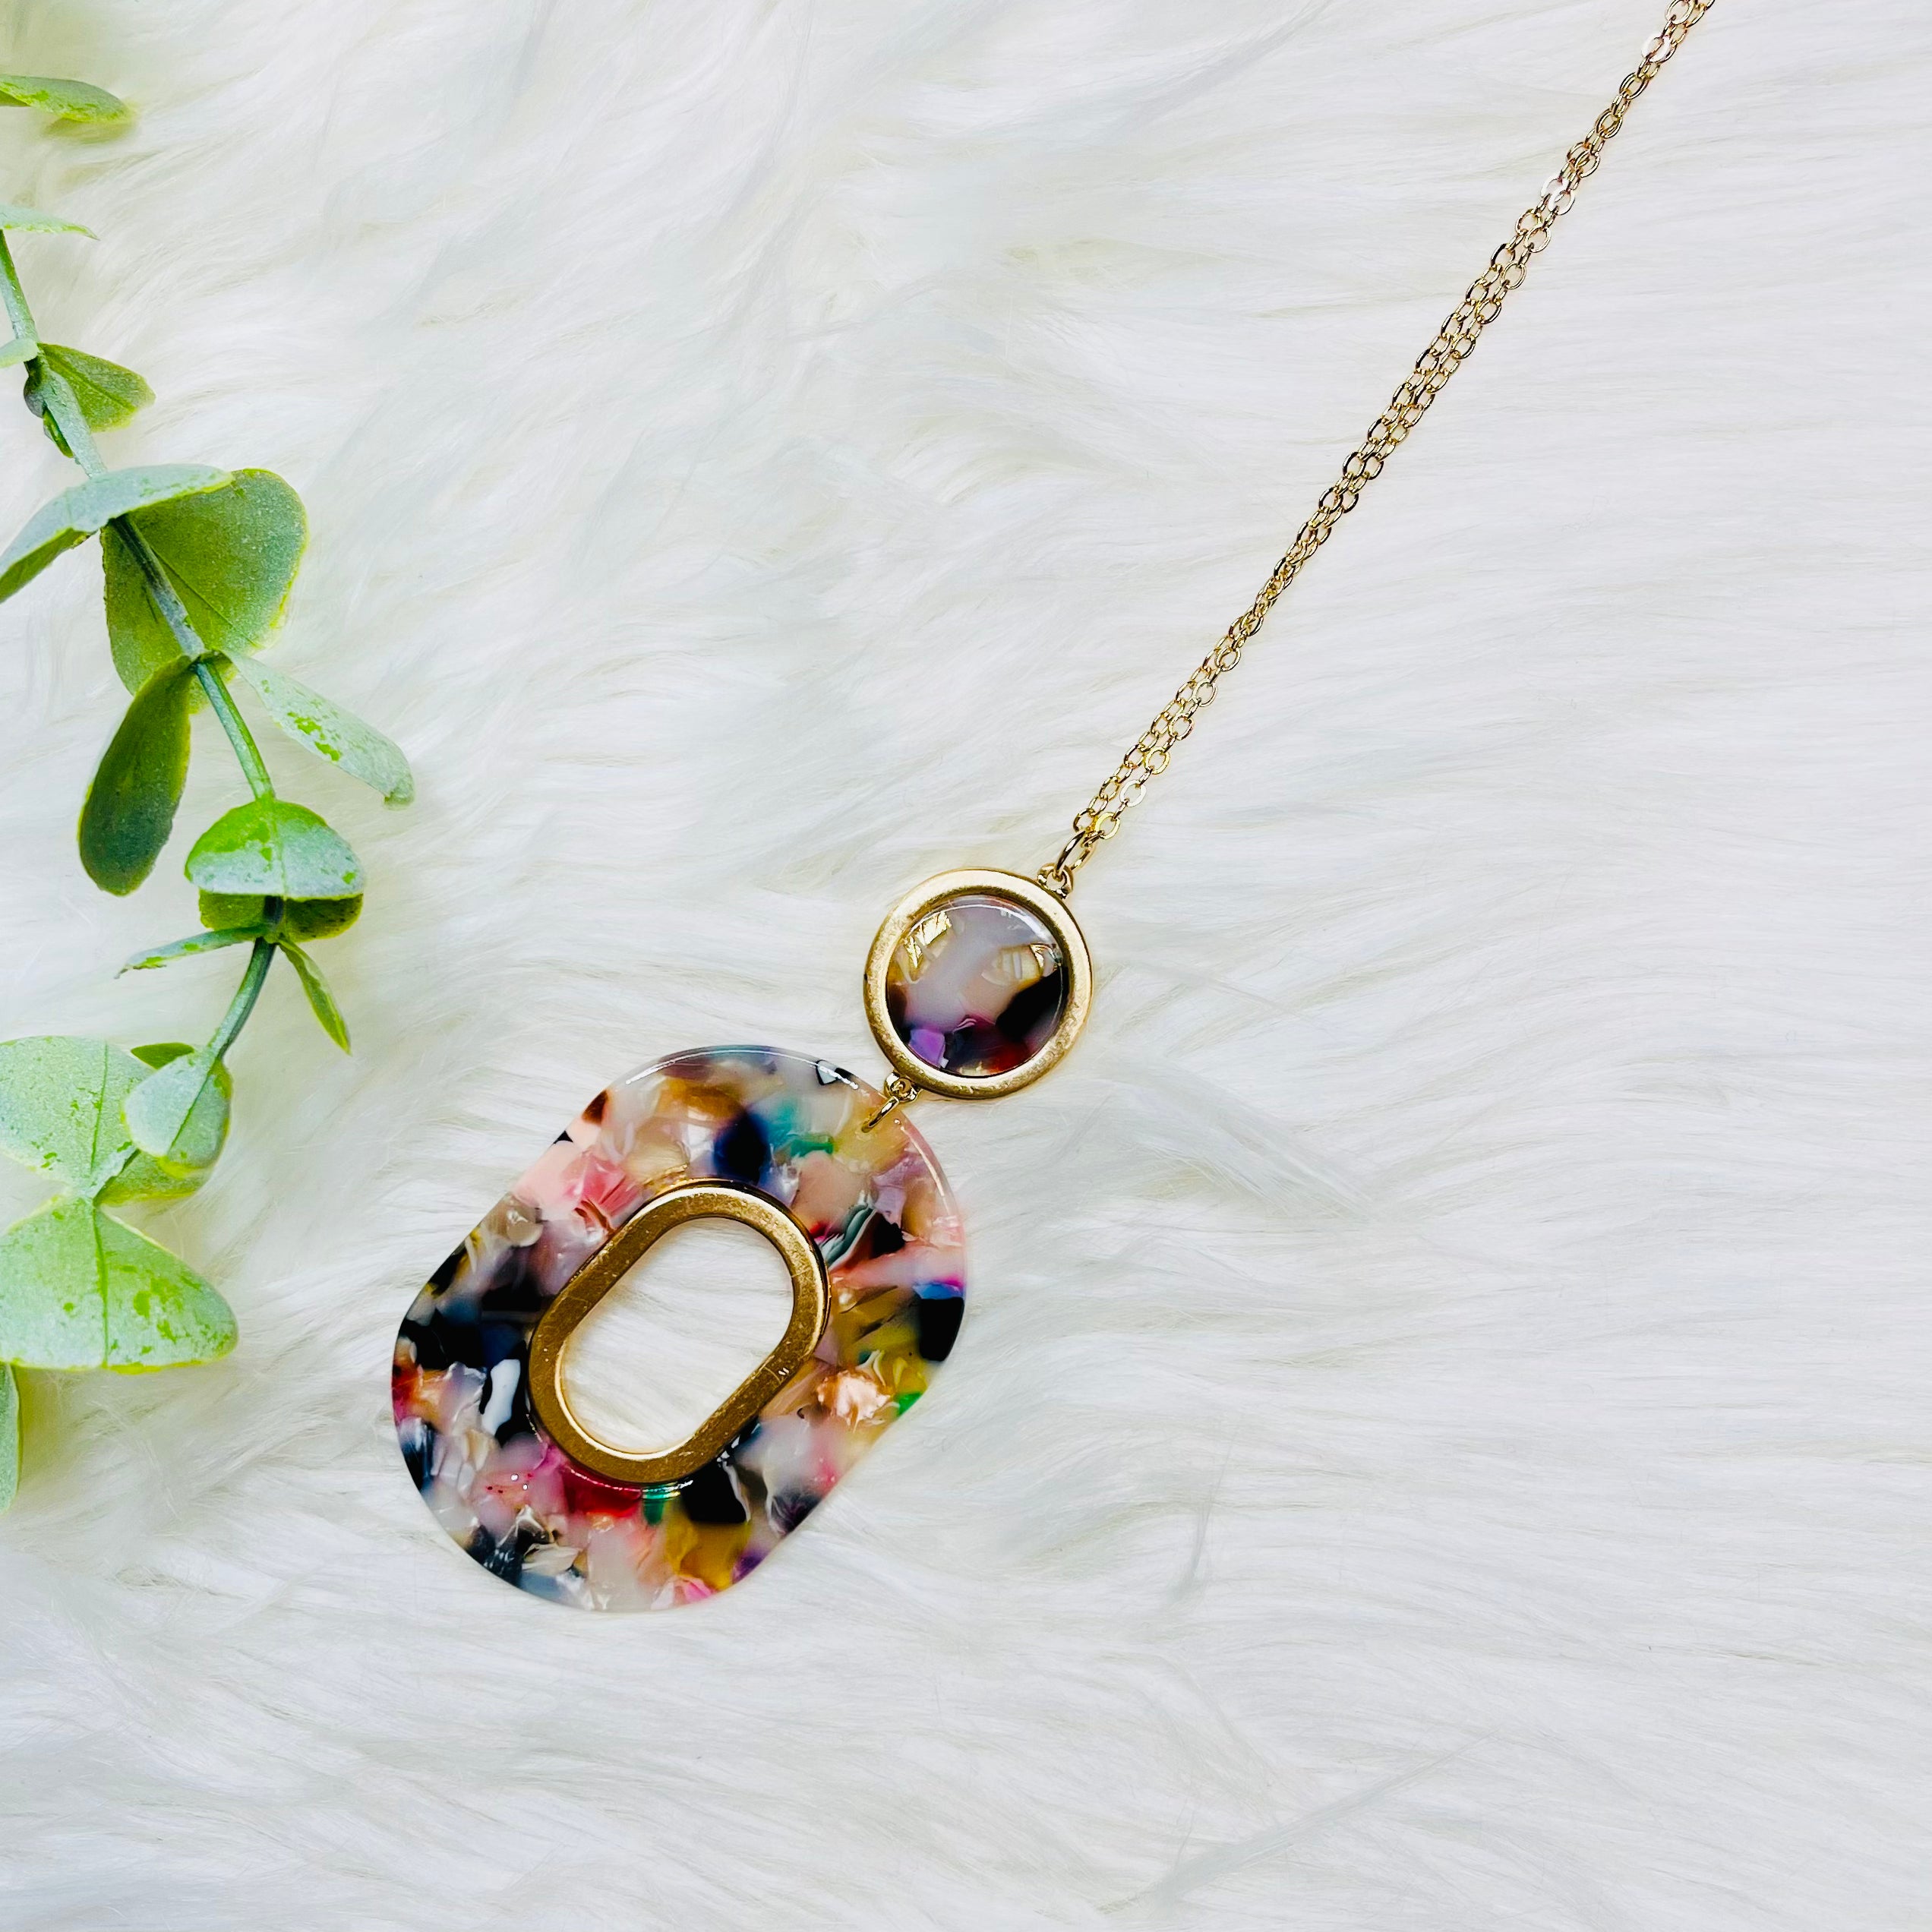 RESIN OVAL HOOP PENDANT NECKLACE